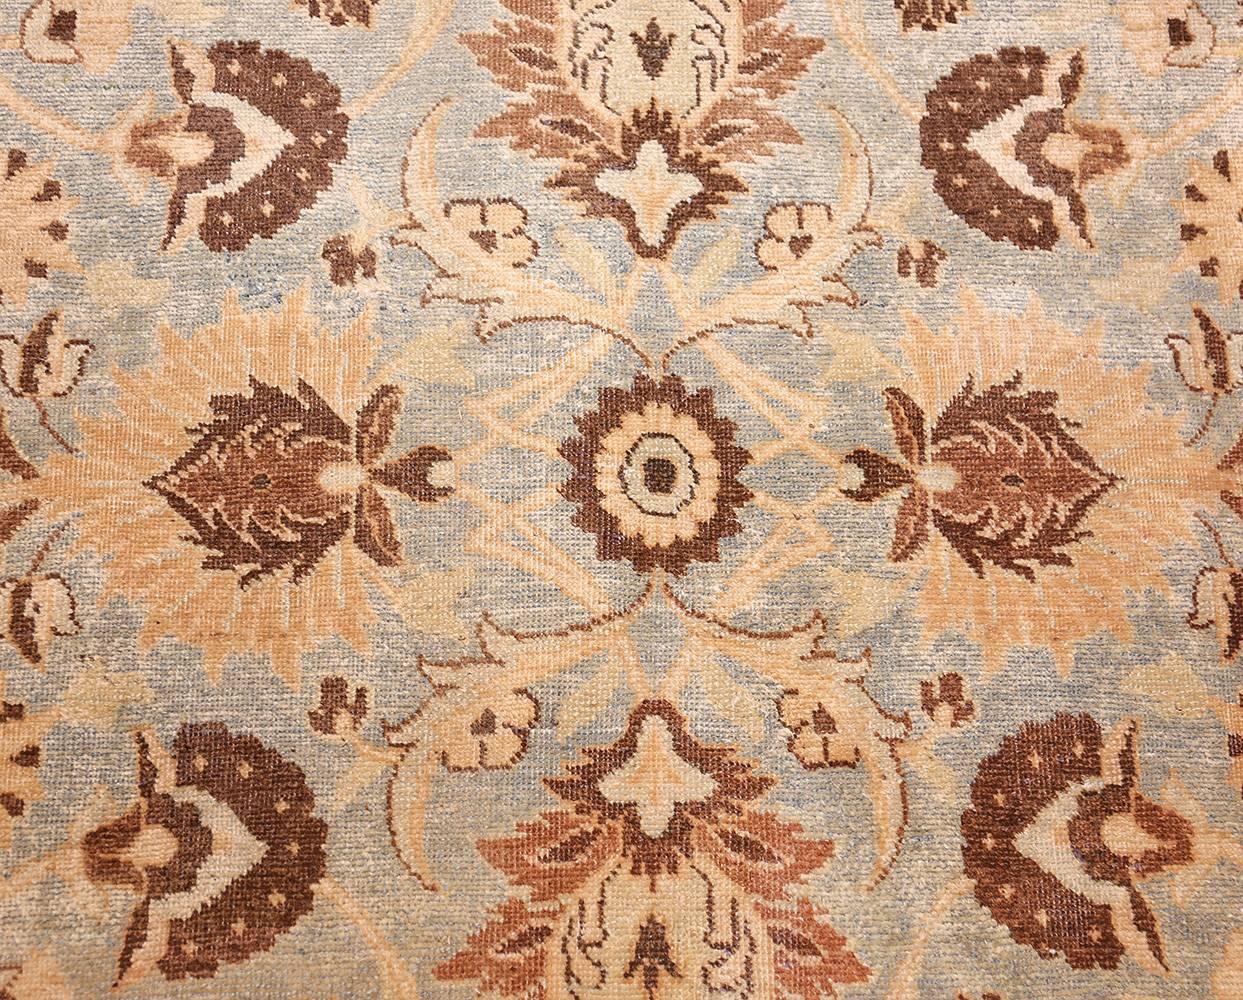 Beautiful Light Blue Background Large Size Antique Persian Khorassan Rug, Country of Origin / Rug Type: Persian Rug, Circa Date: Early 20th Century. Size: 11 ft 9 in x 15 ft (3.58 m x 4.57 m)

Like so many of the beautiful antique Persian